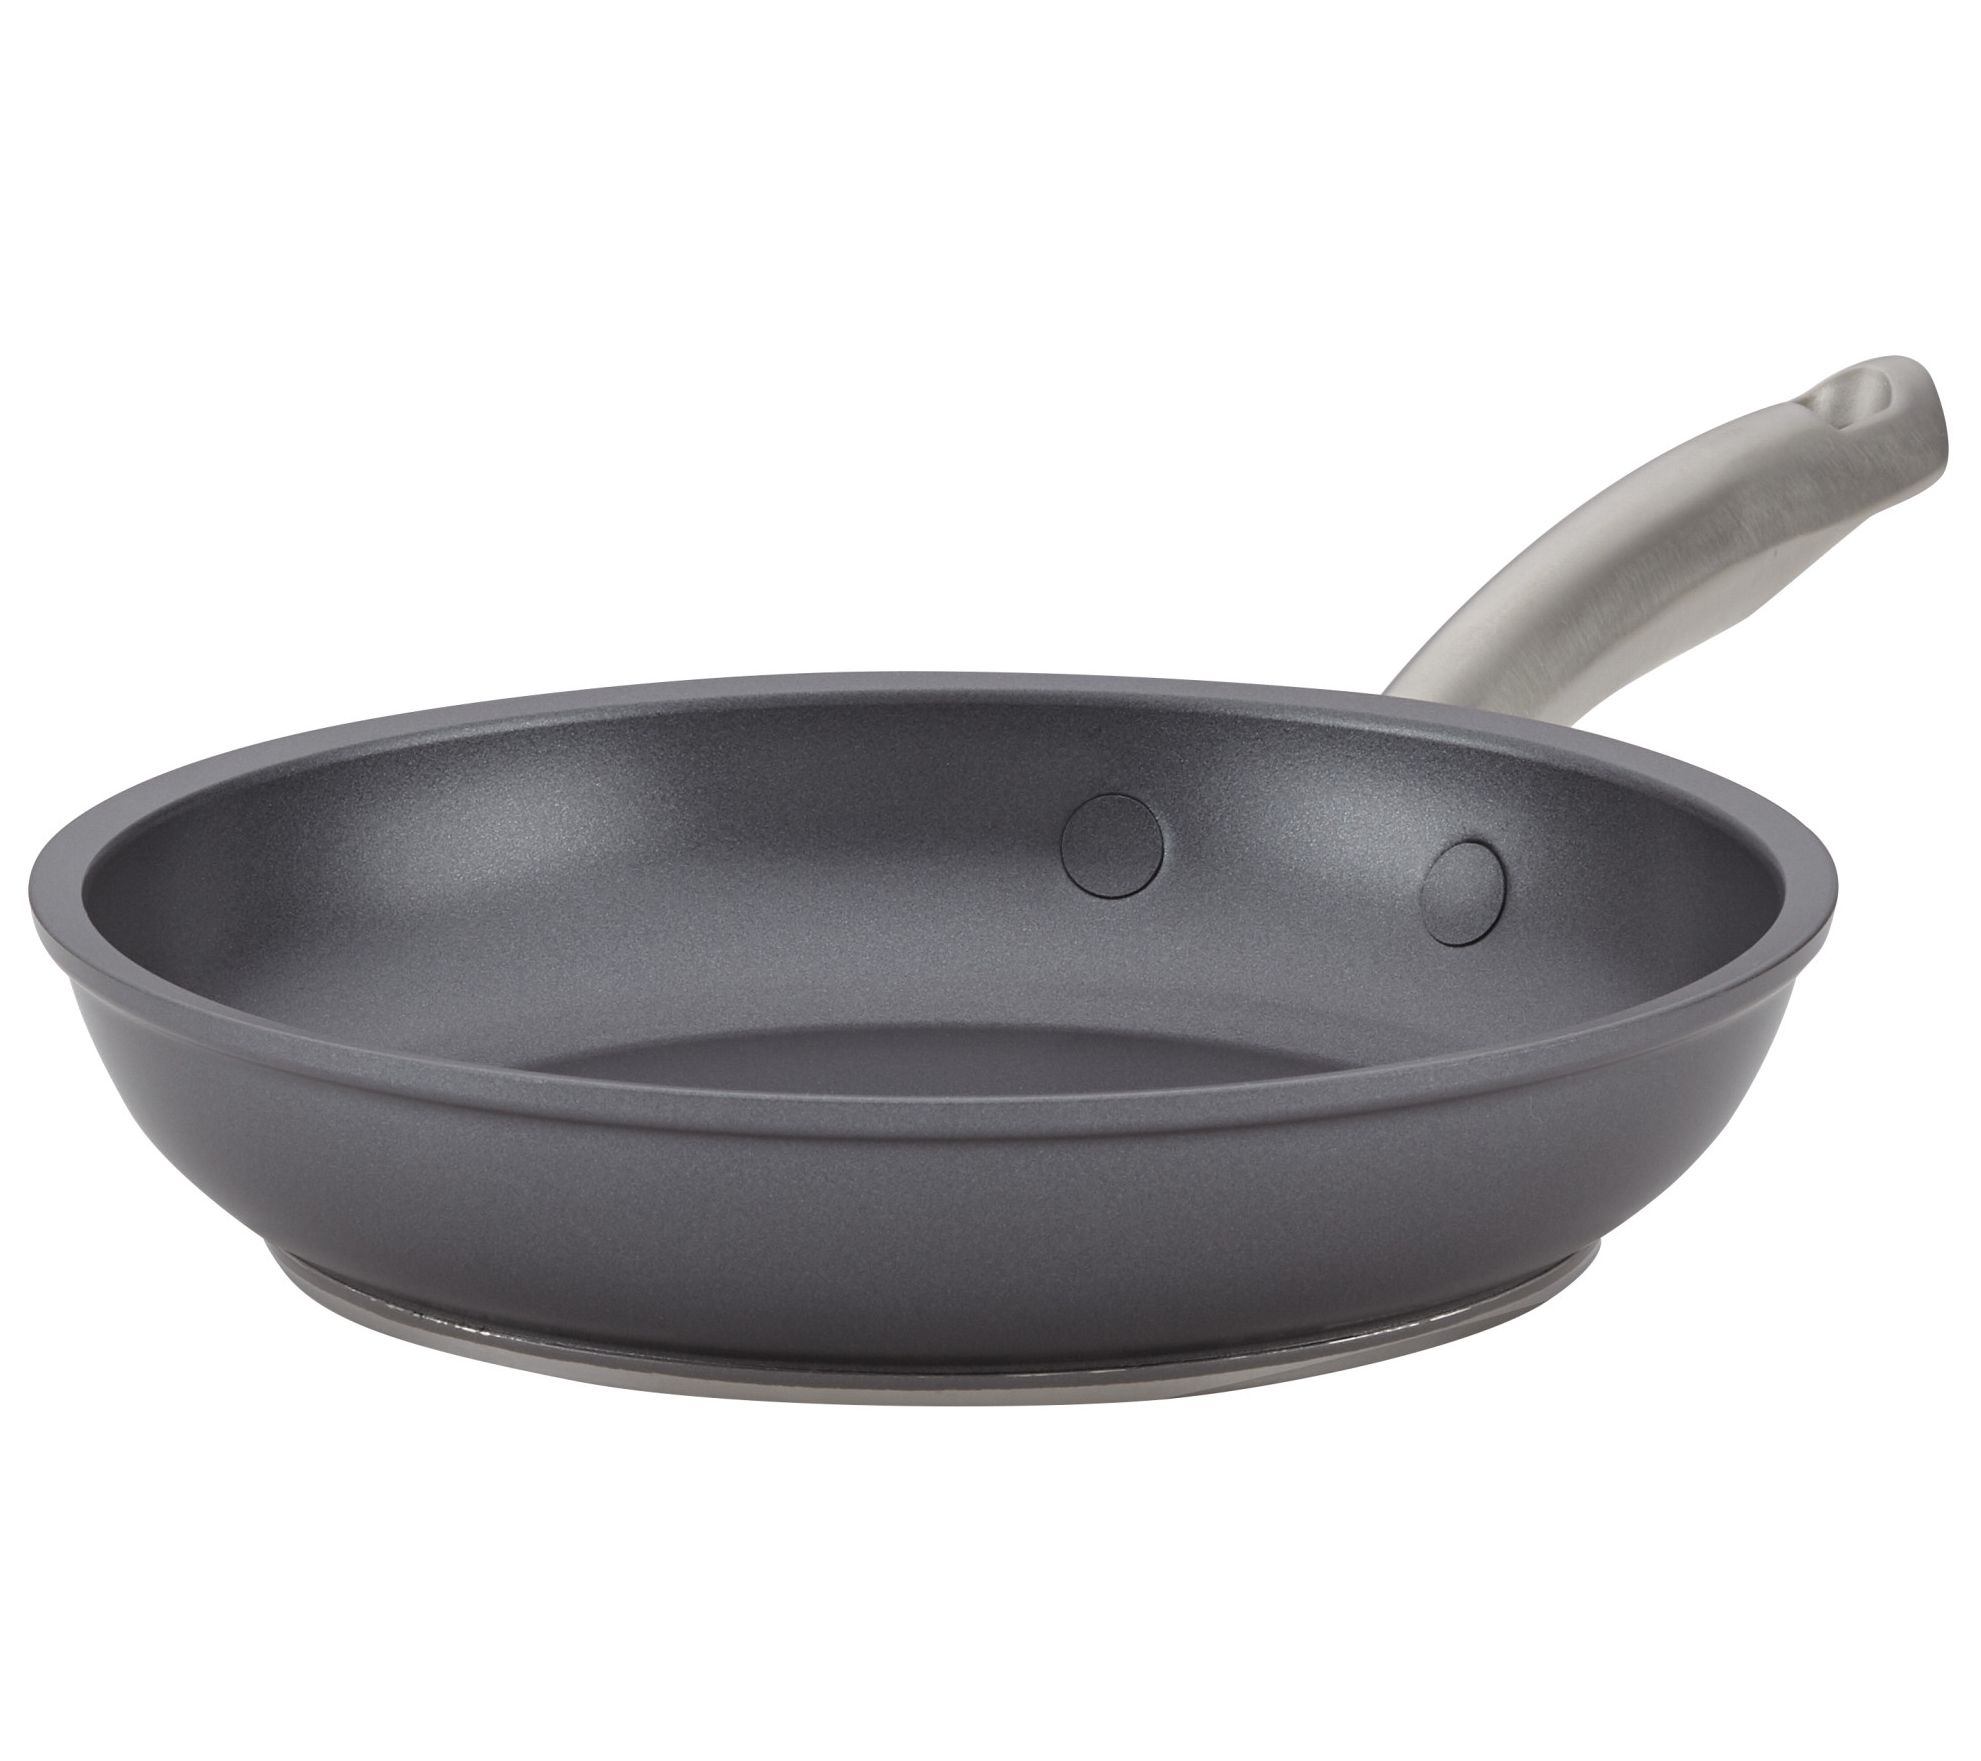 Anolon Ascend Hard Anodized Nonstick Frying Pan 12-Inch